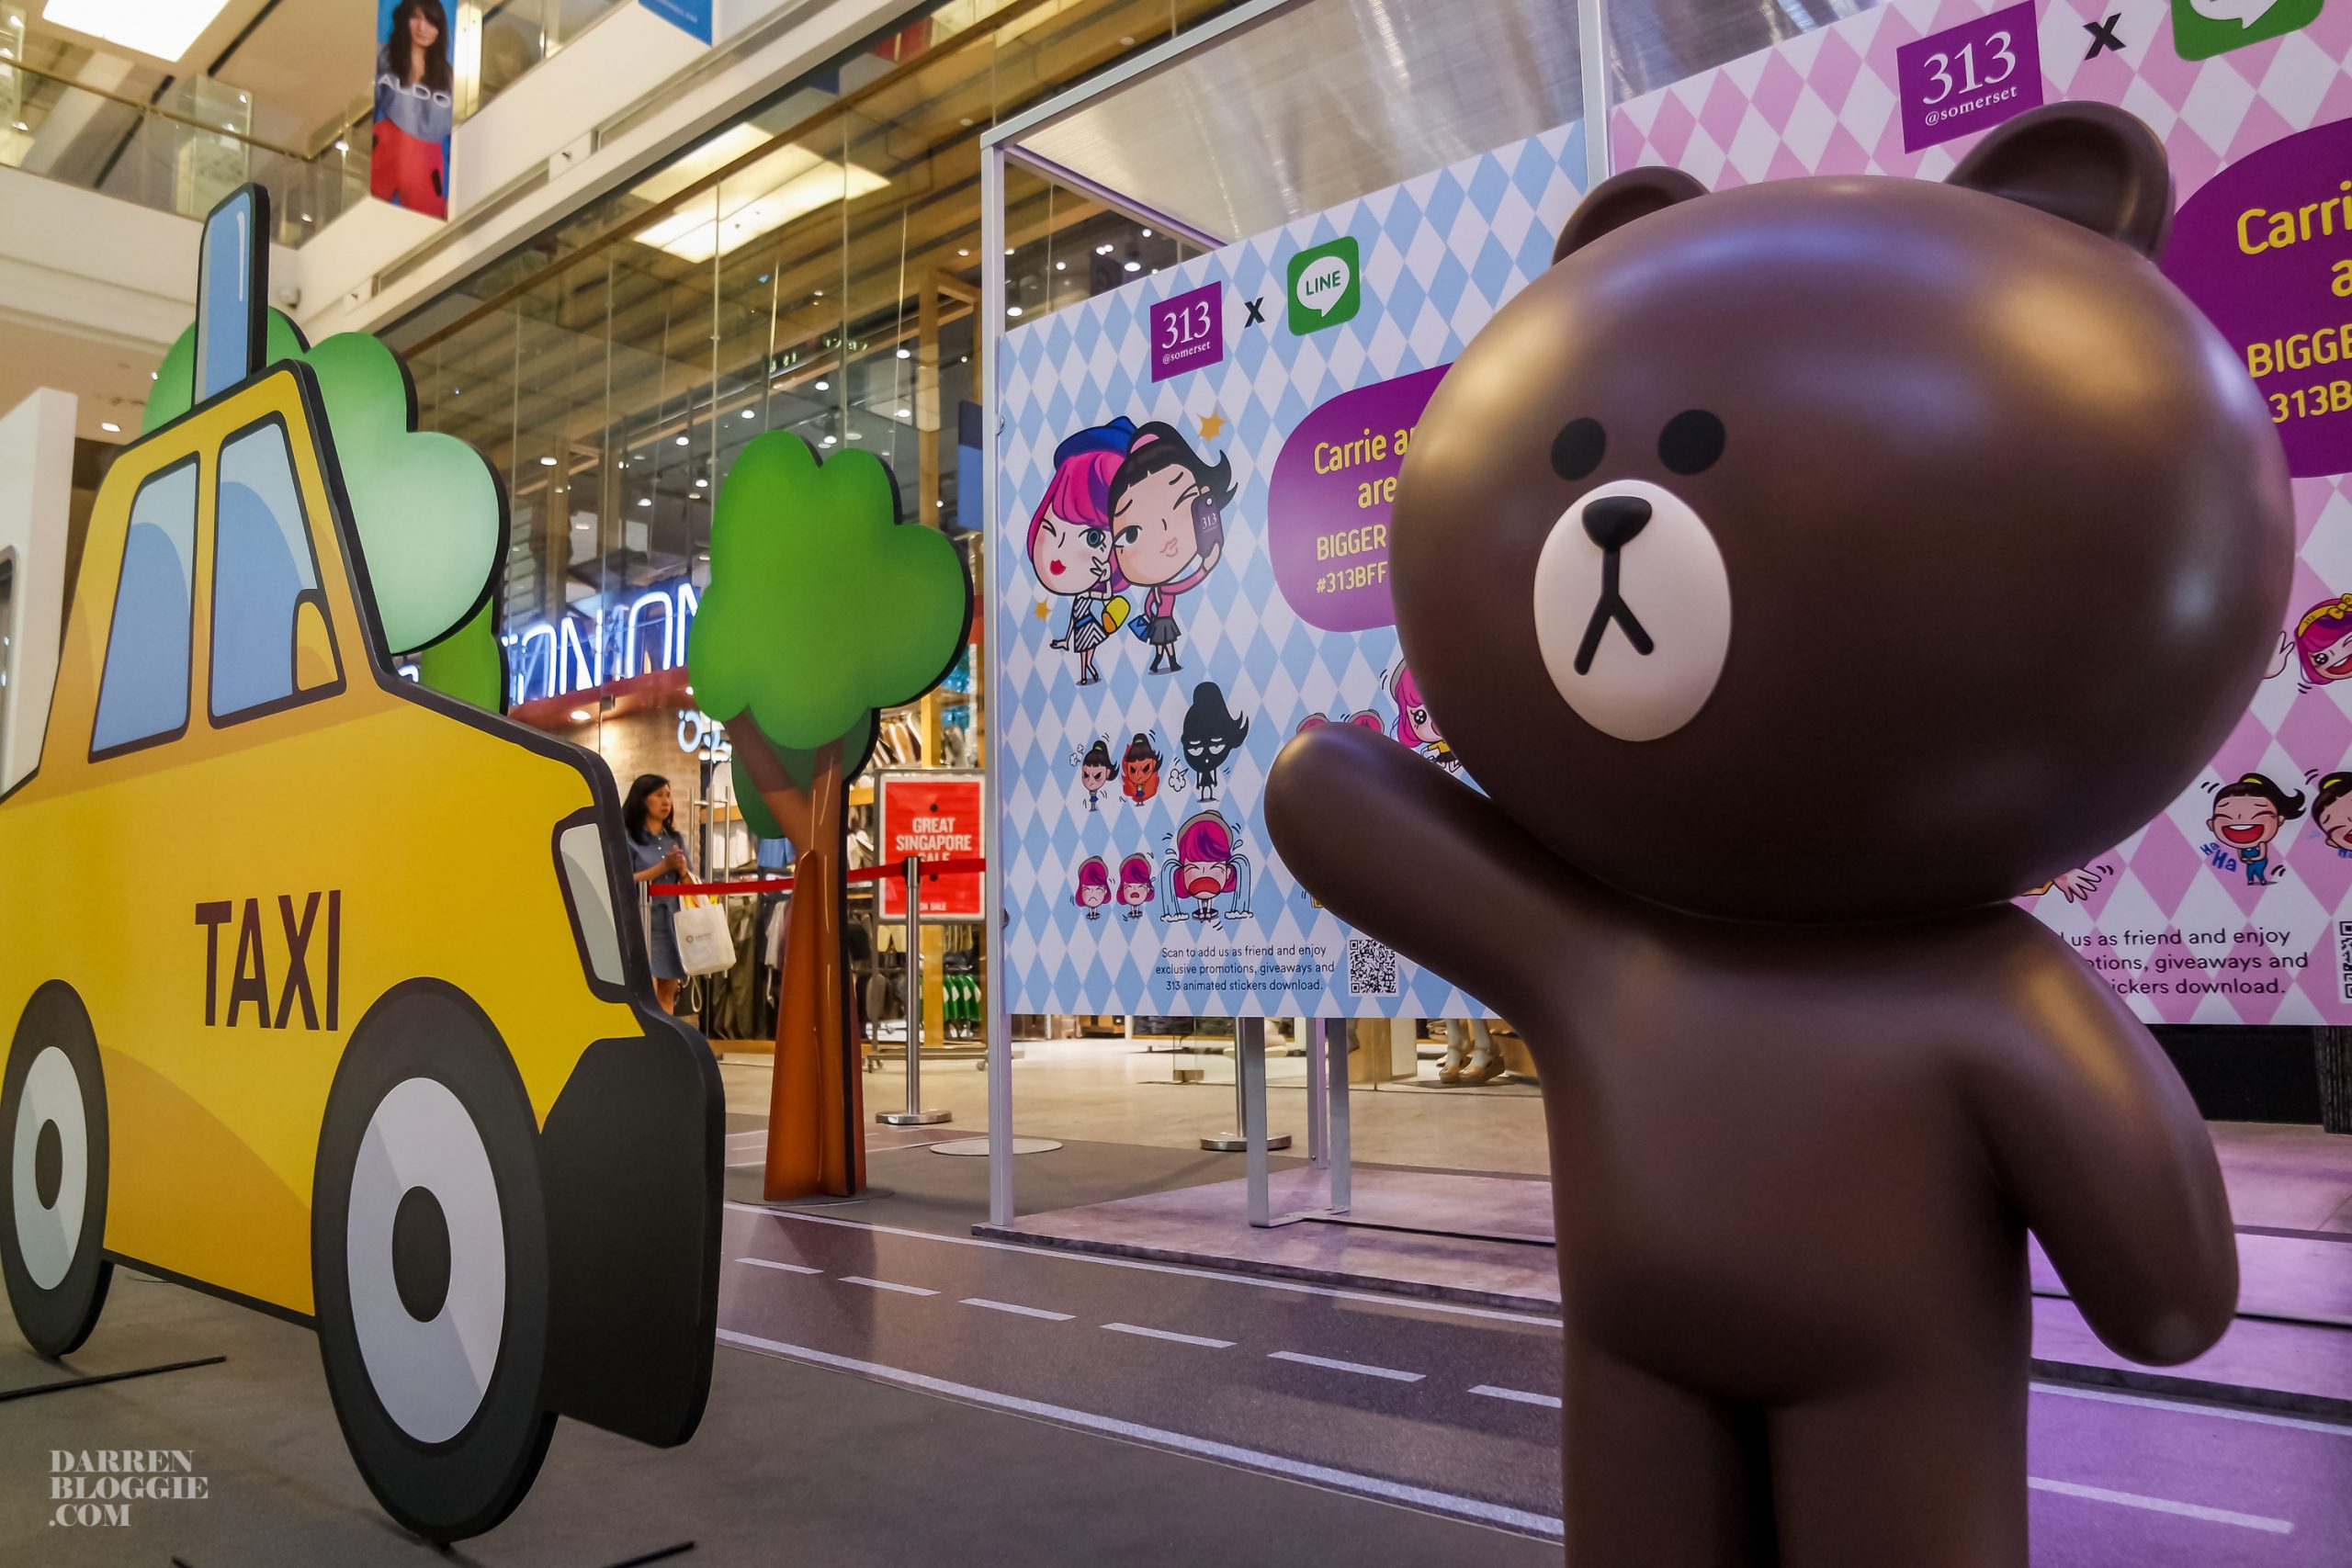 Joyride with LINE Friends at 313@Somerset